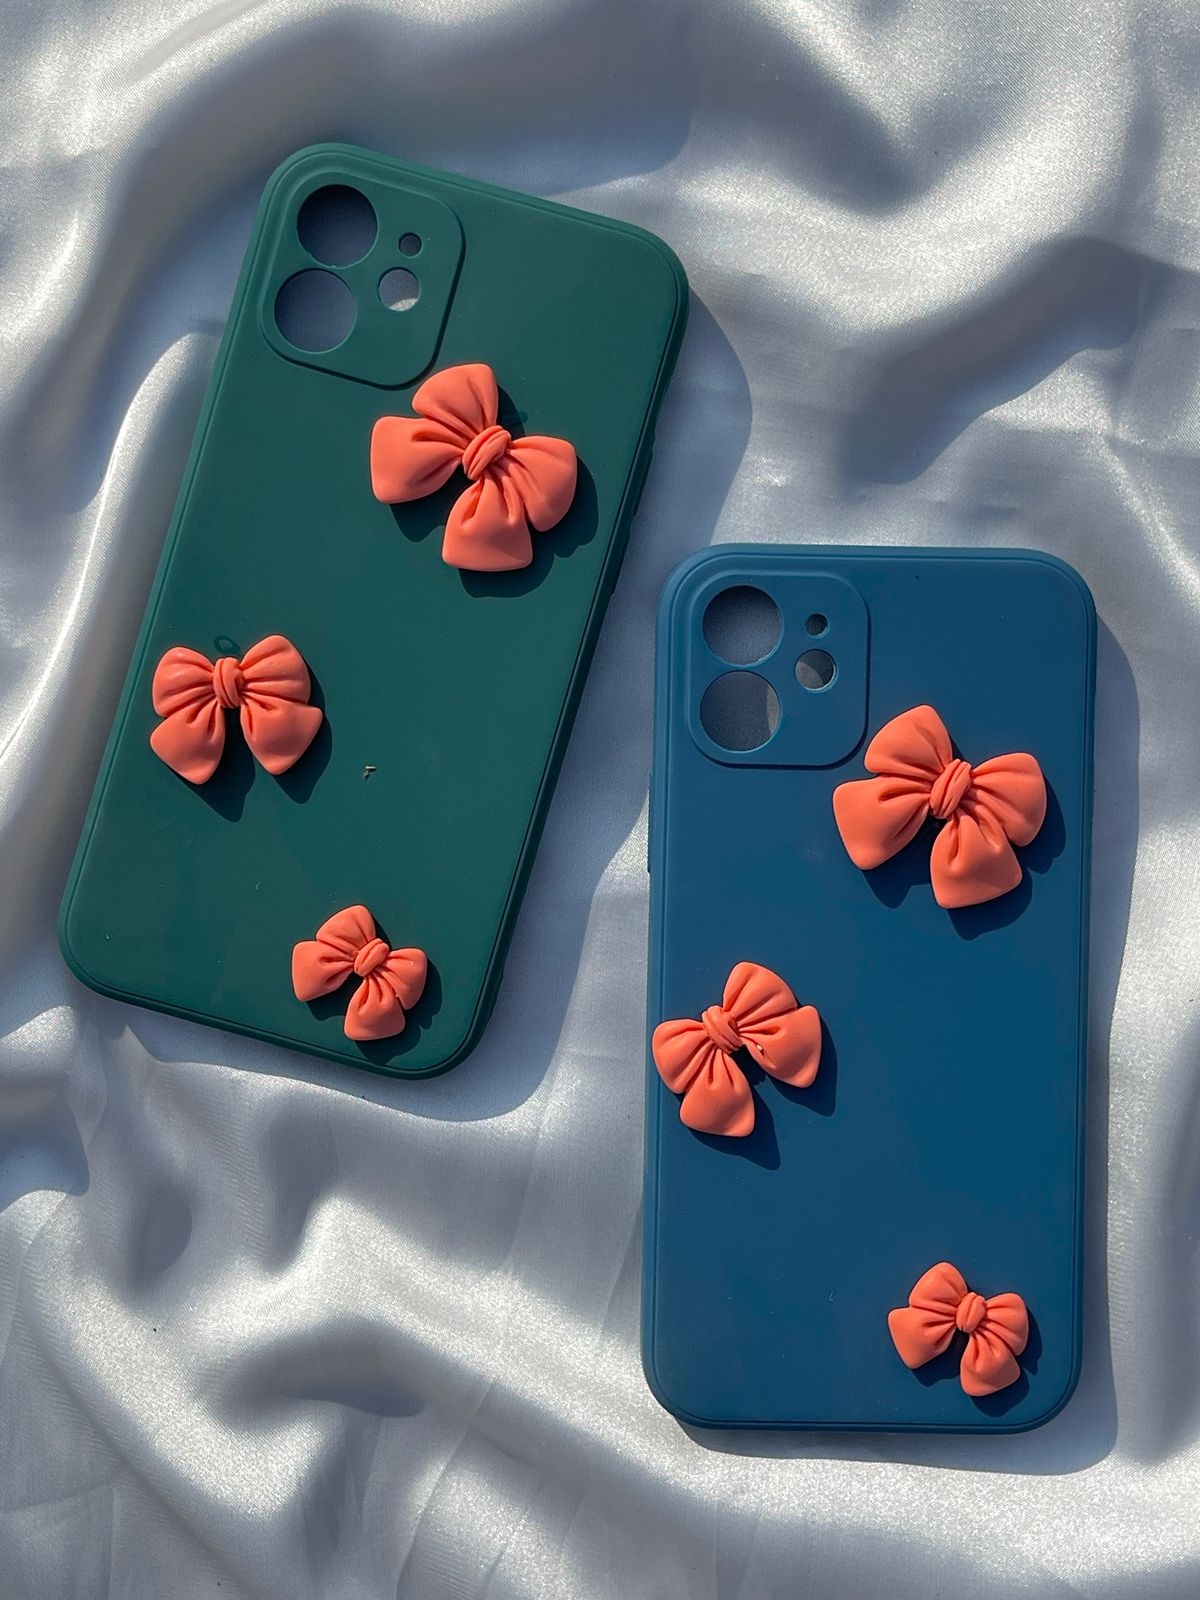 iPhone "12" Silicone Case "Butterfly Back" Edition